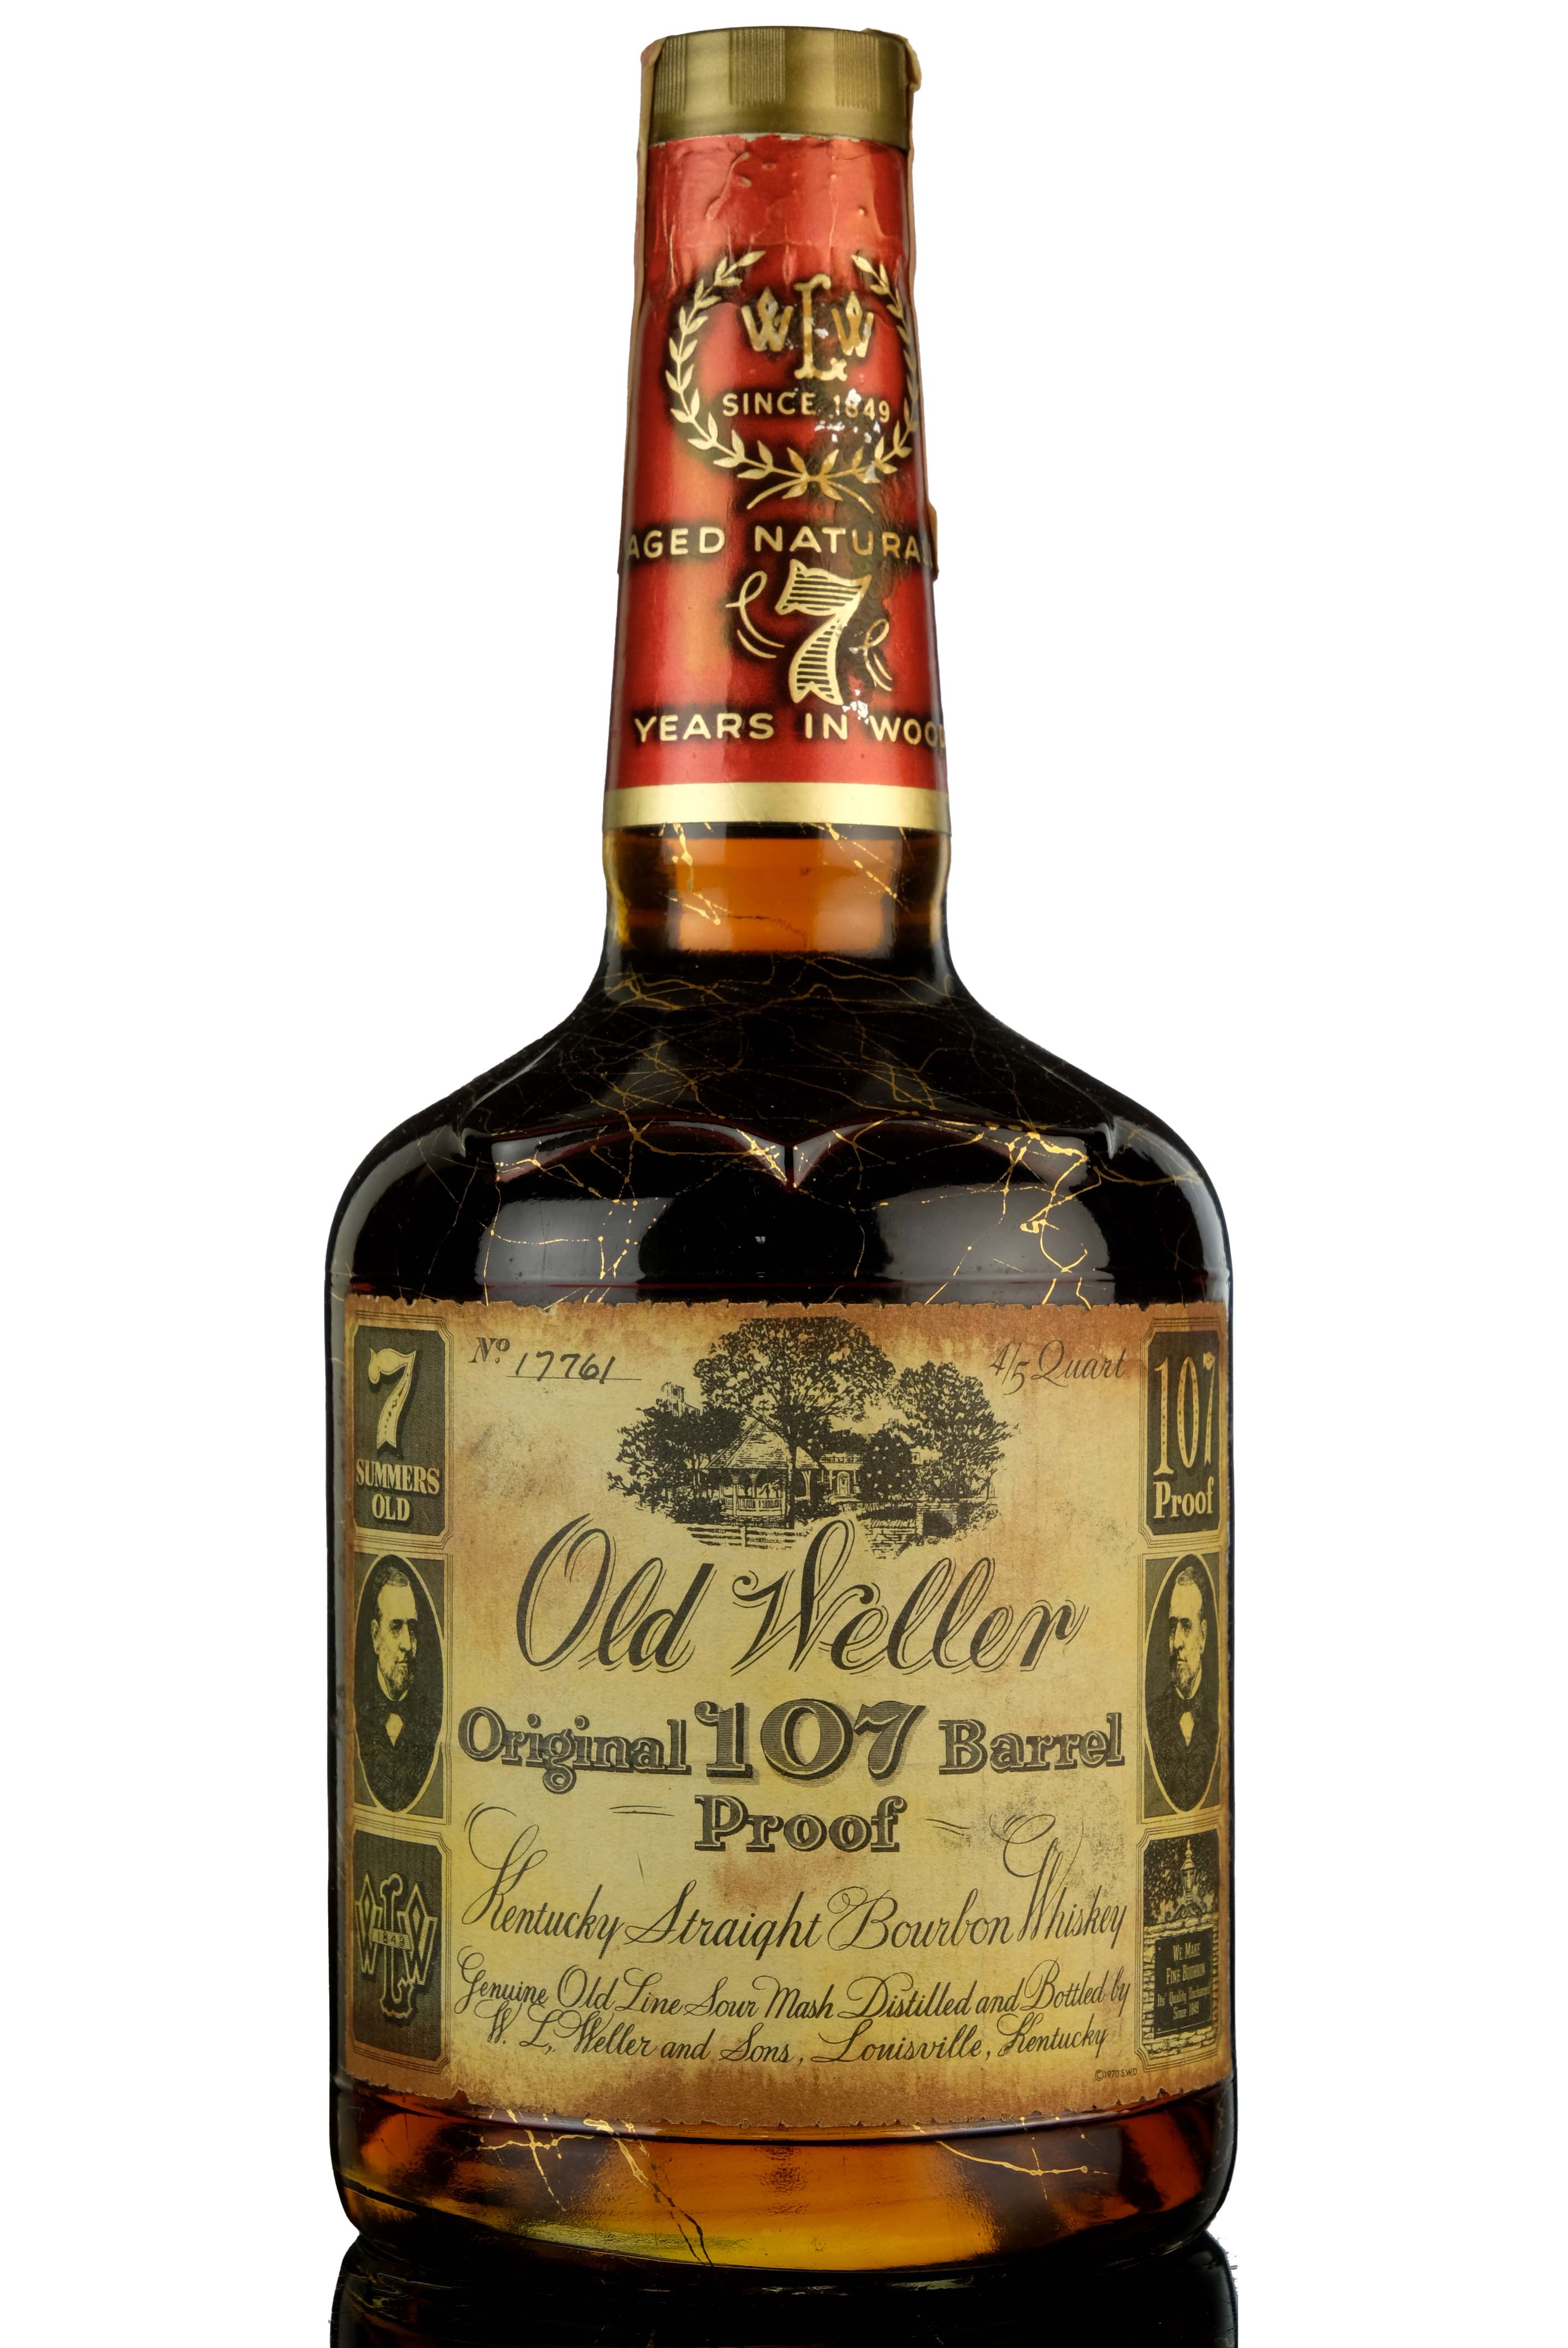 Old Weller 7 Year Old - Kentucky Straight Bourbon Whiskey - 107 Proof